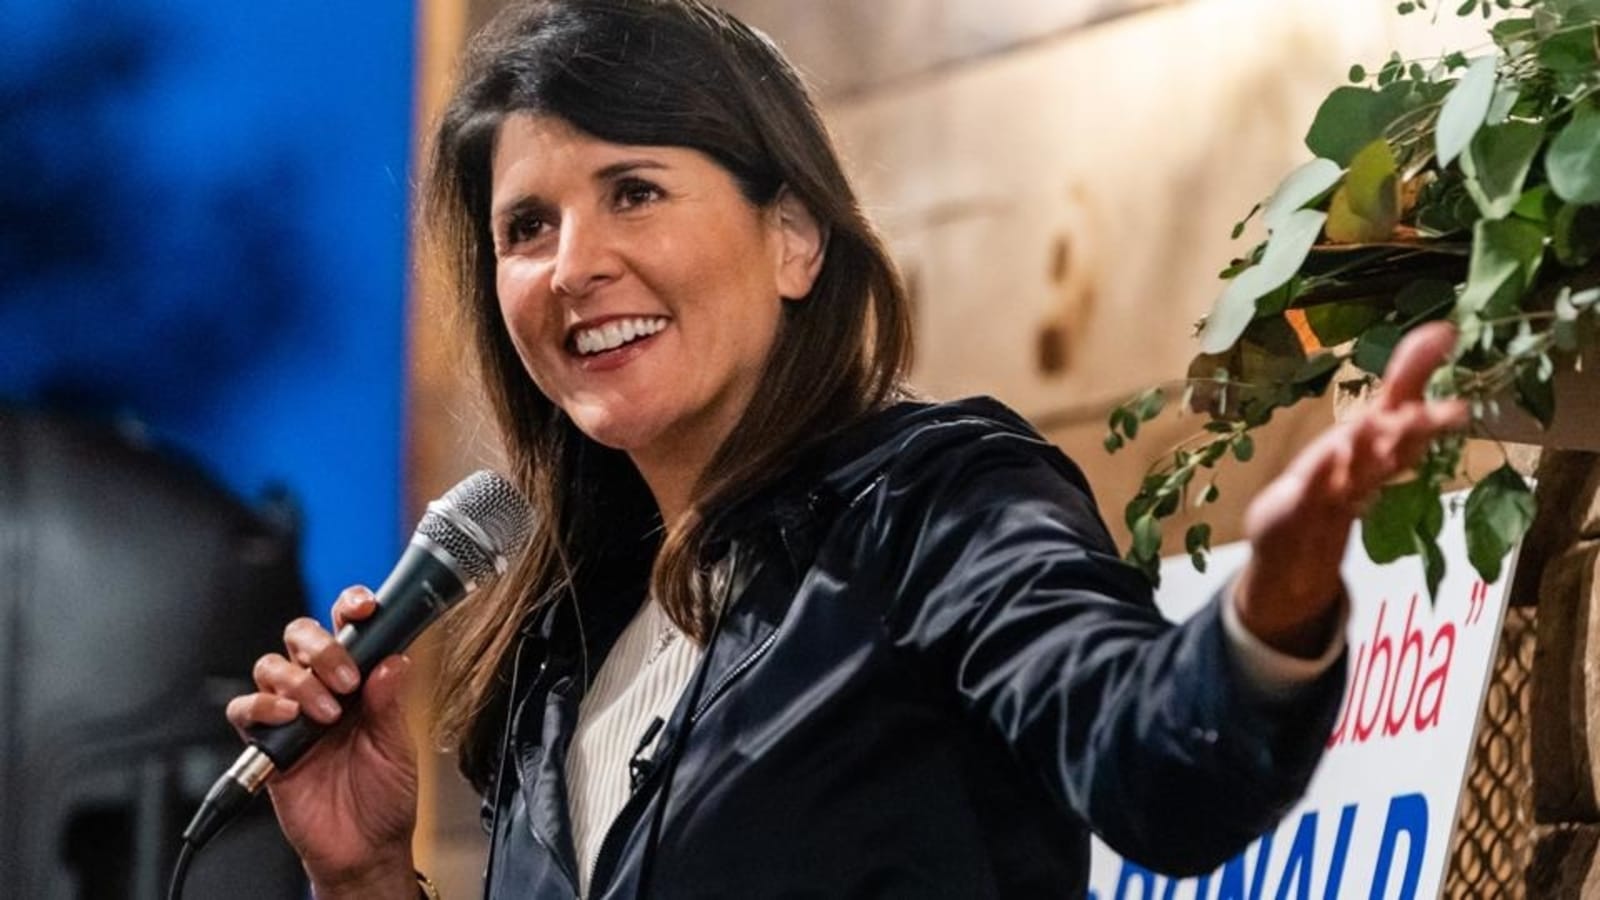 ‘He let us down’: Nikki Haley breaks with former boss Donald Trump ...